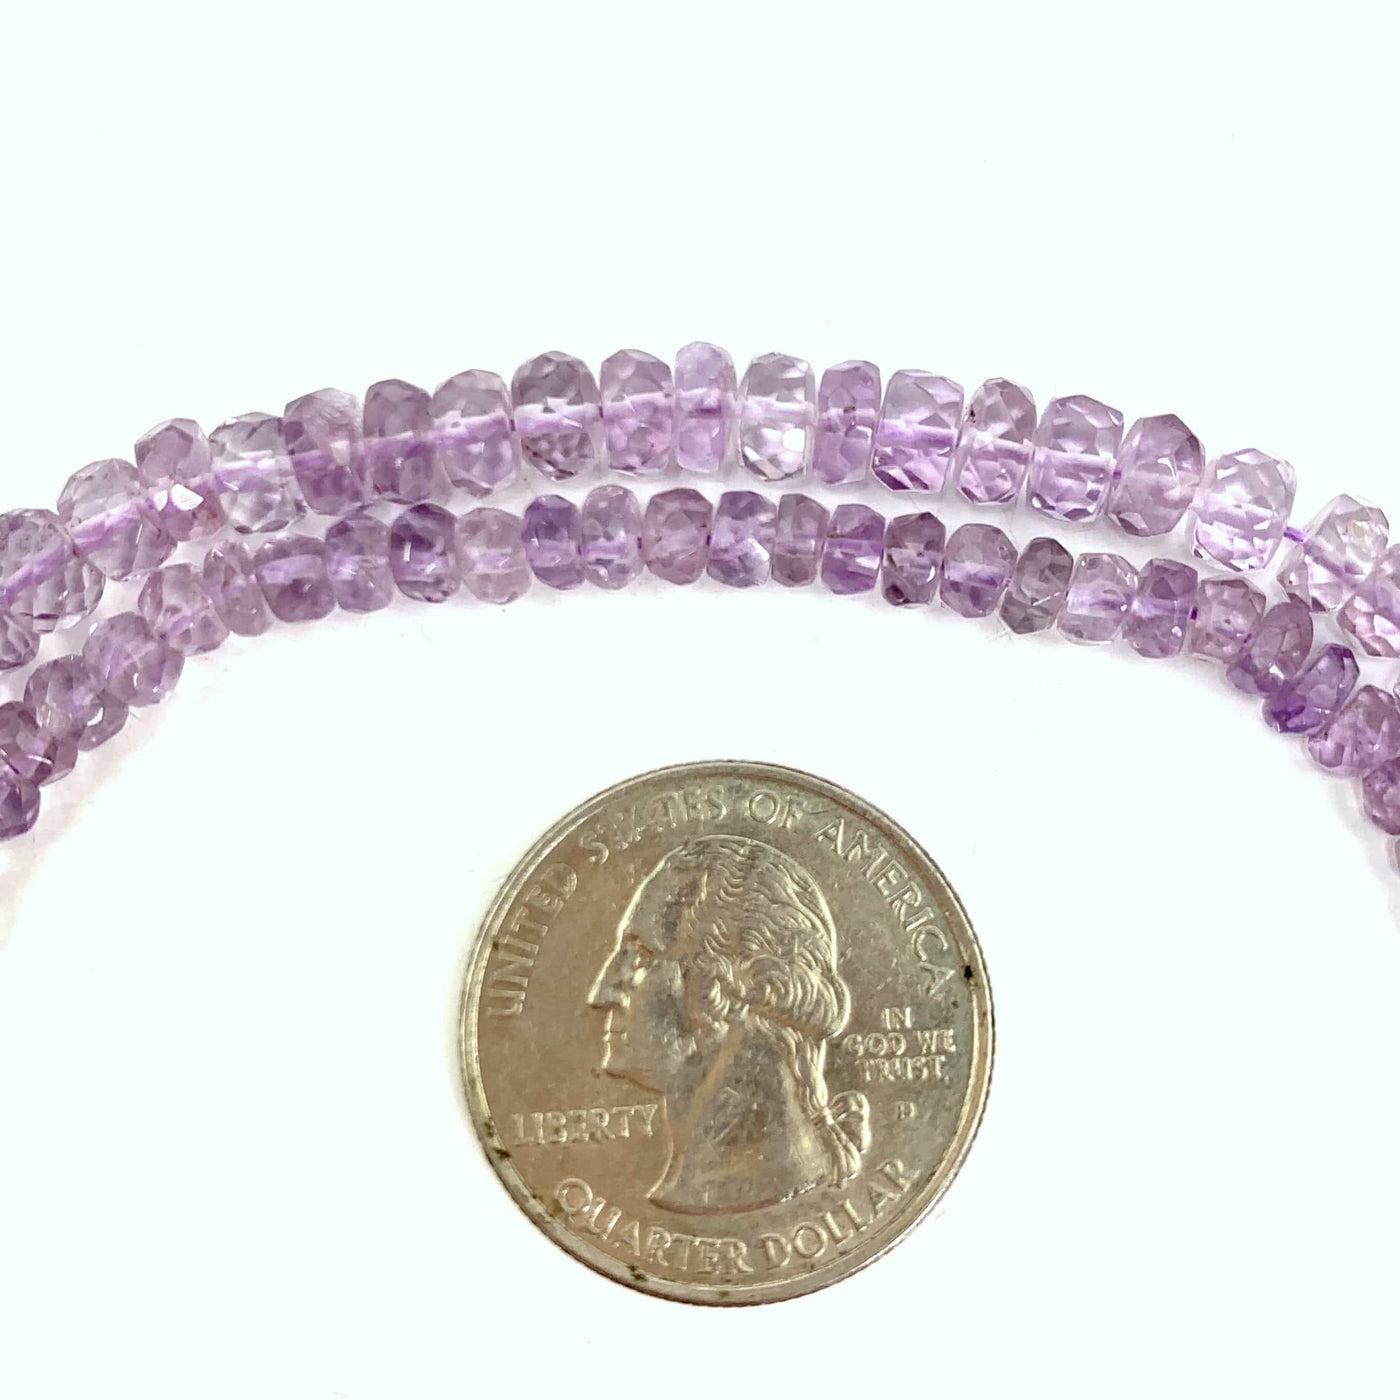 both amethyst beads ( top large, bottom small) next to a quarter on a white background